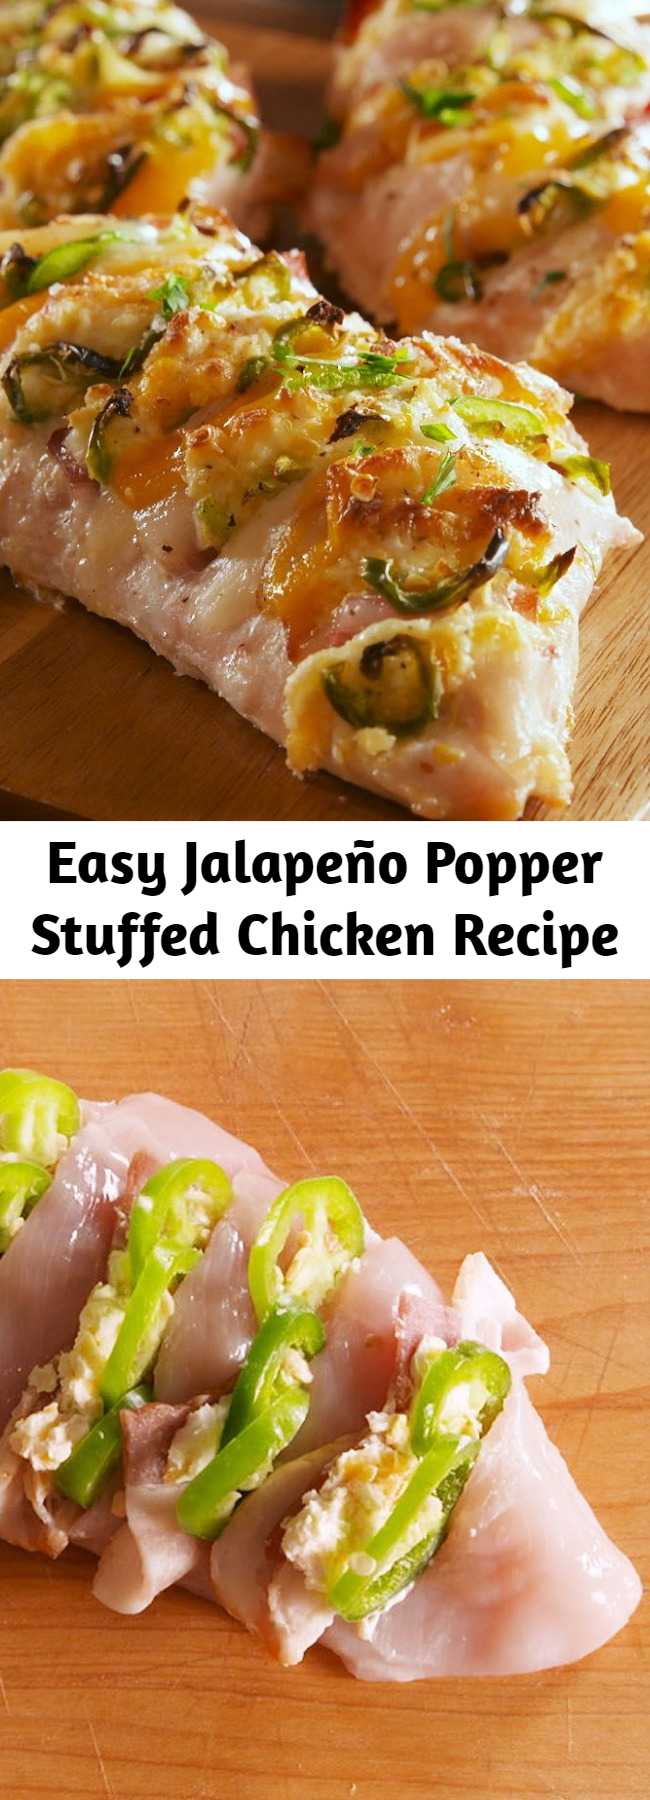 Easy Jalapeño Popper Stuffed Chicken Recipe - If you love jalapeño poppers, this is the chicken dinner of your DREAMS. With all the ingredients evenly distributed, every bite is perfect. #chickenrecipes #jalapenopoppers #jalapeno #spicy #healthyrecipes #easyrecipes #easychickenrecipes #dinner